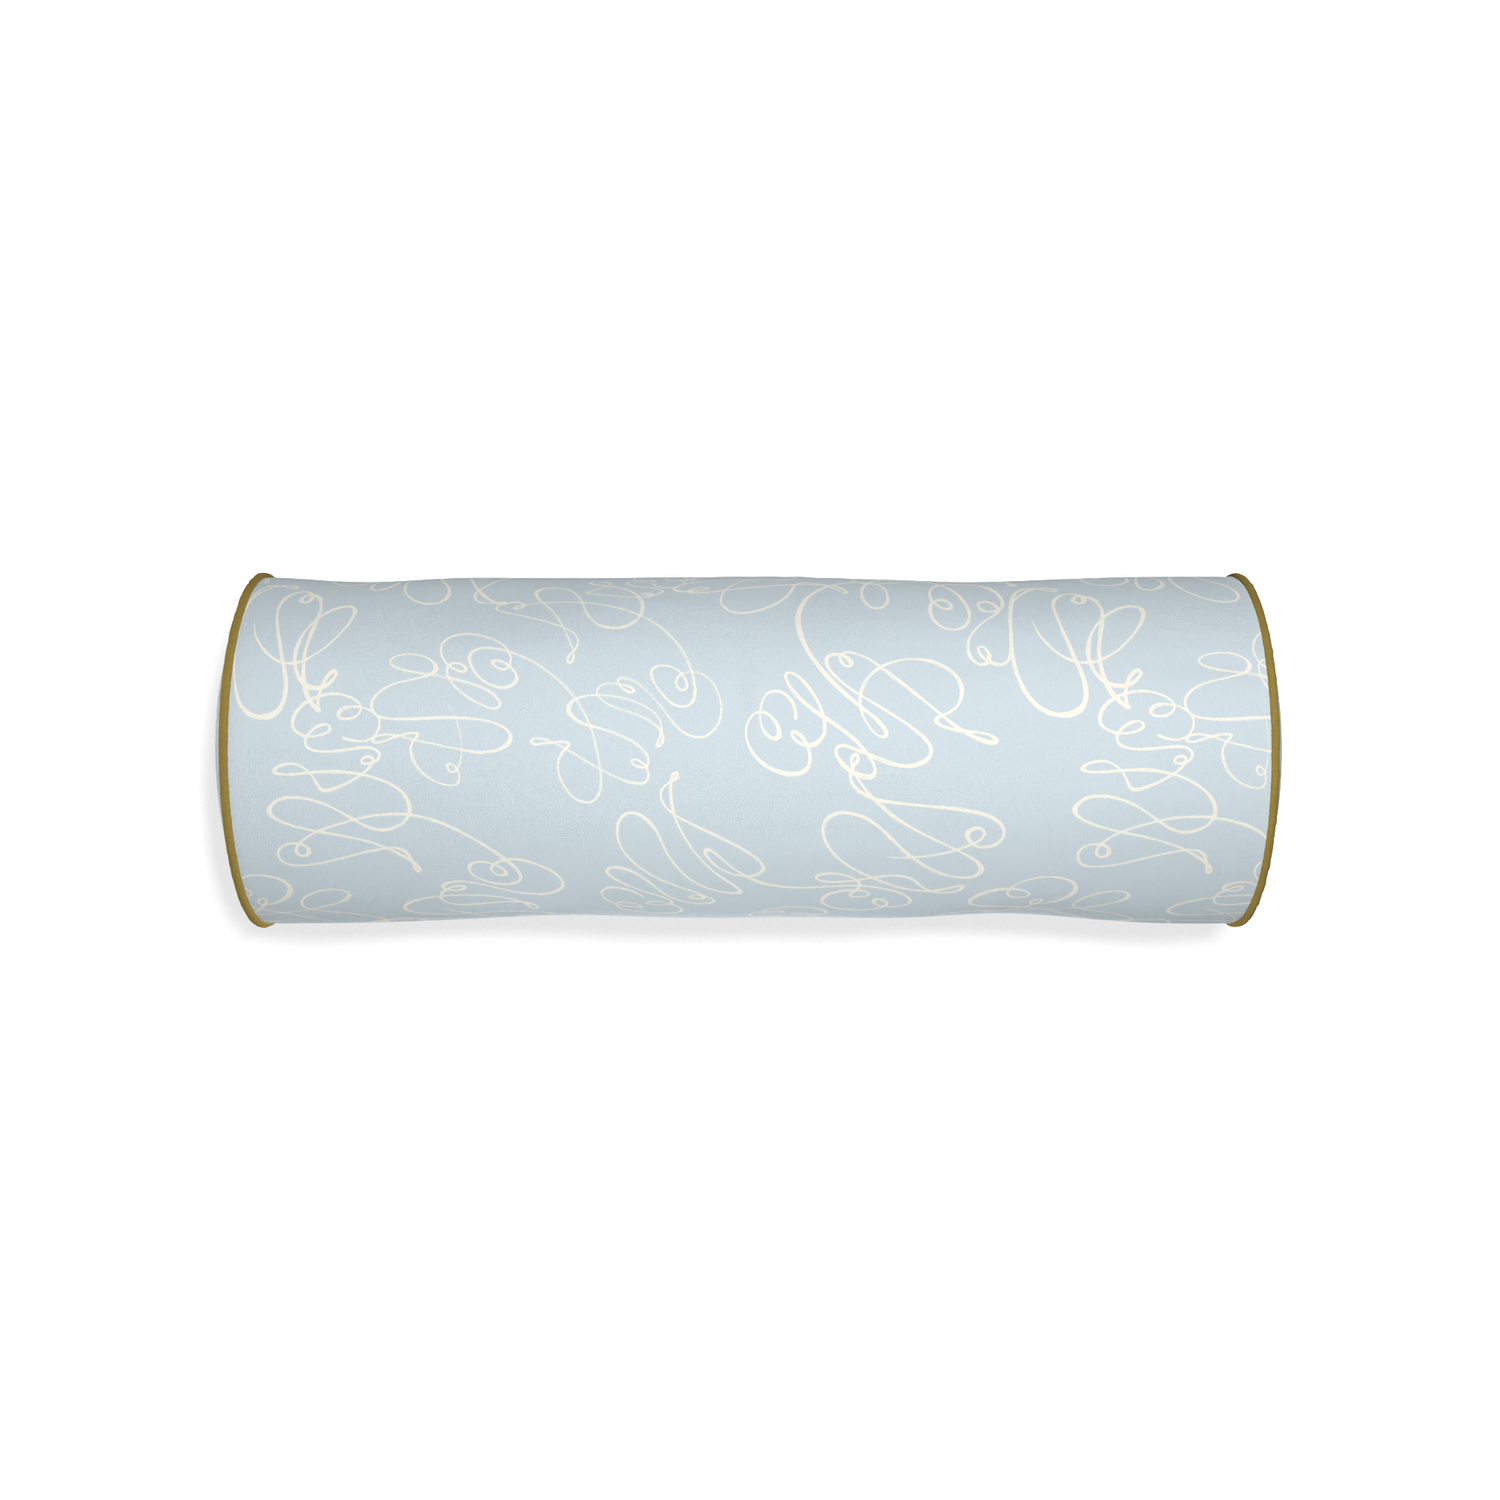 Bolster mirabella custom powder blue abstractpillow with c piping on white background